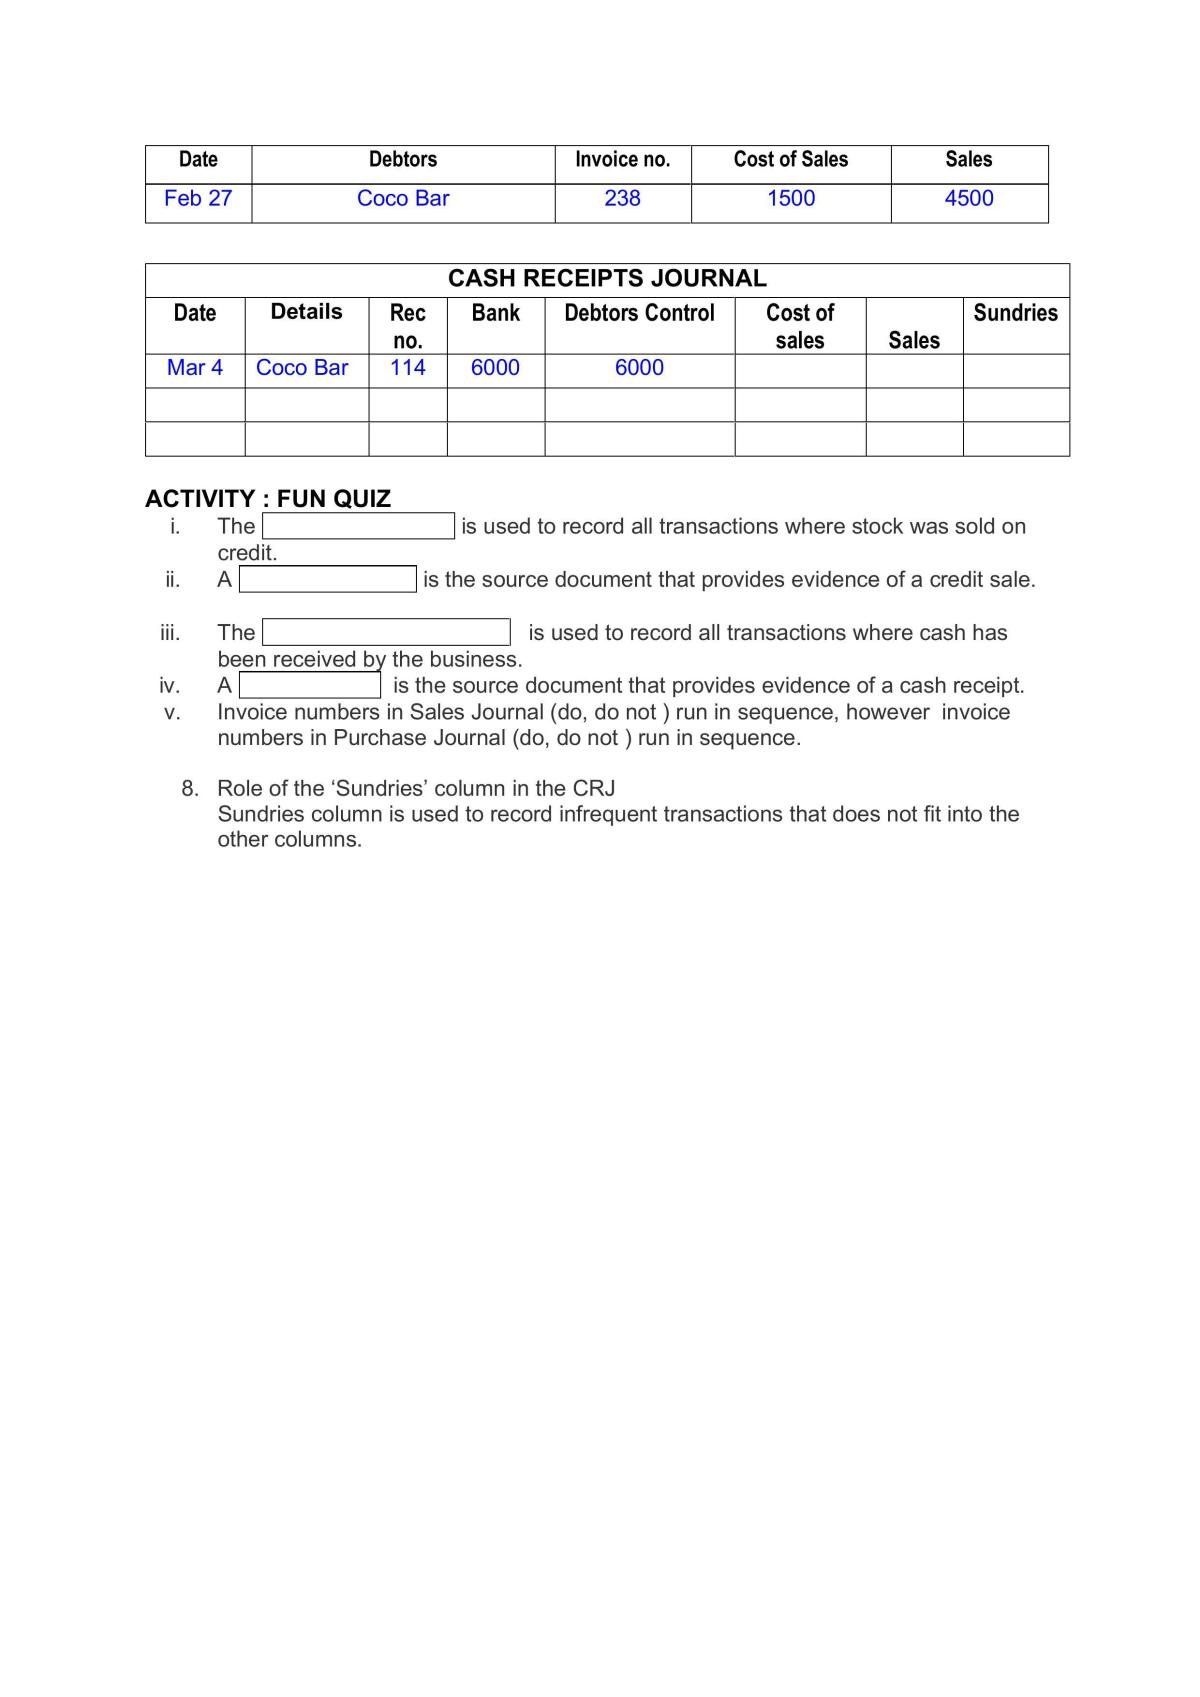 MUFY Accounting Unit 1 Notes - Page 47